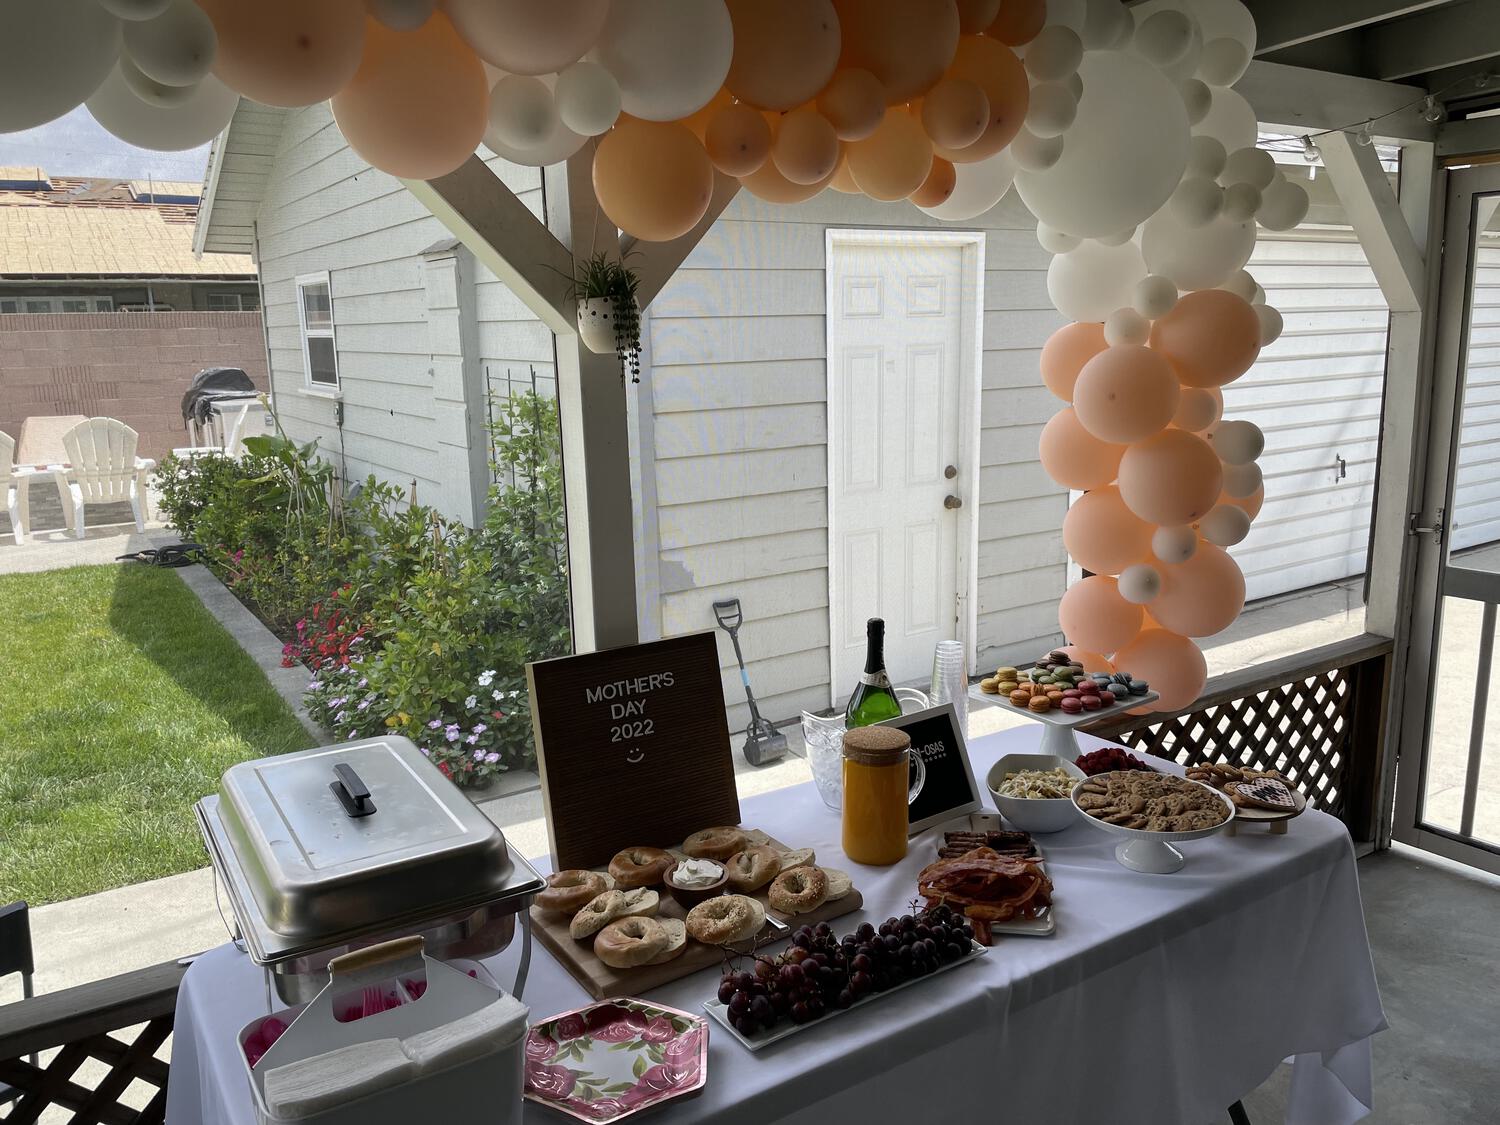 Lots of brunch food spread out on a table with decorations and a sign that reads "Mother's Day 2022"